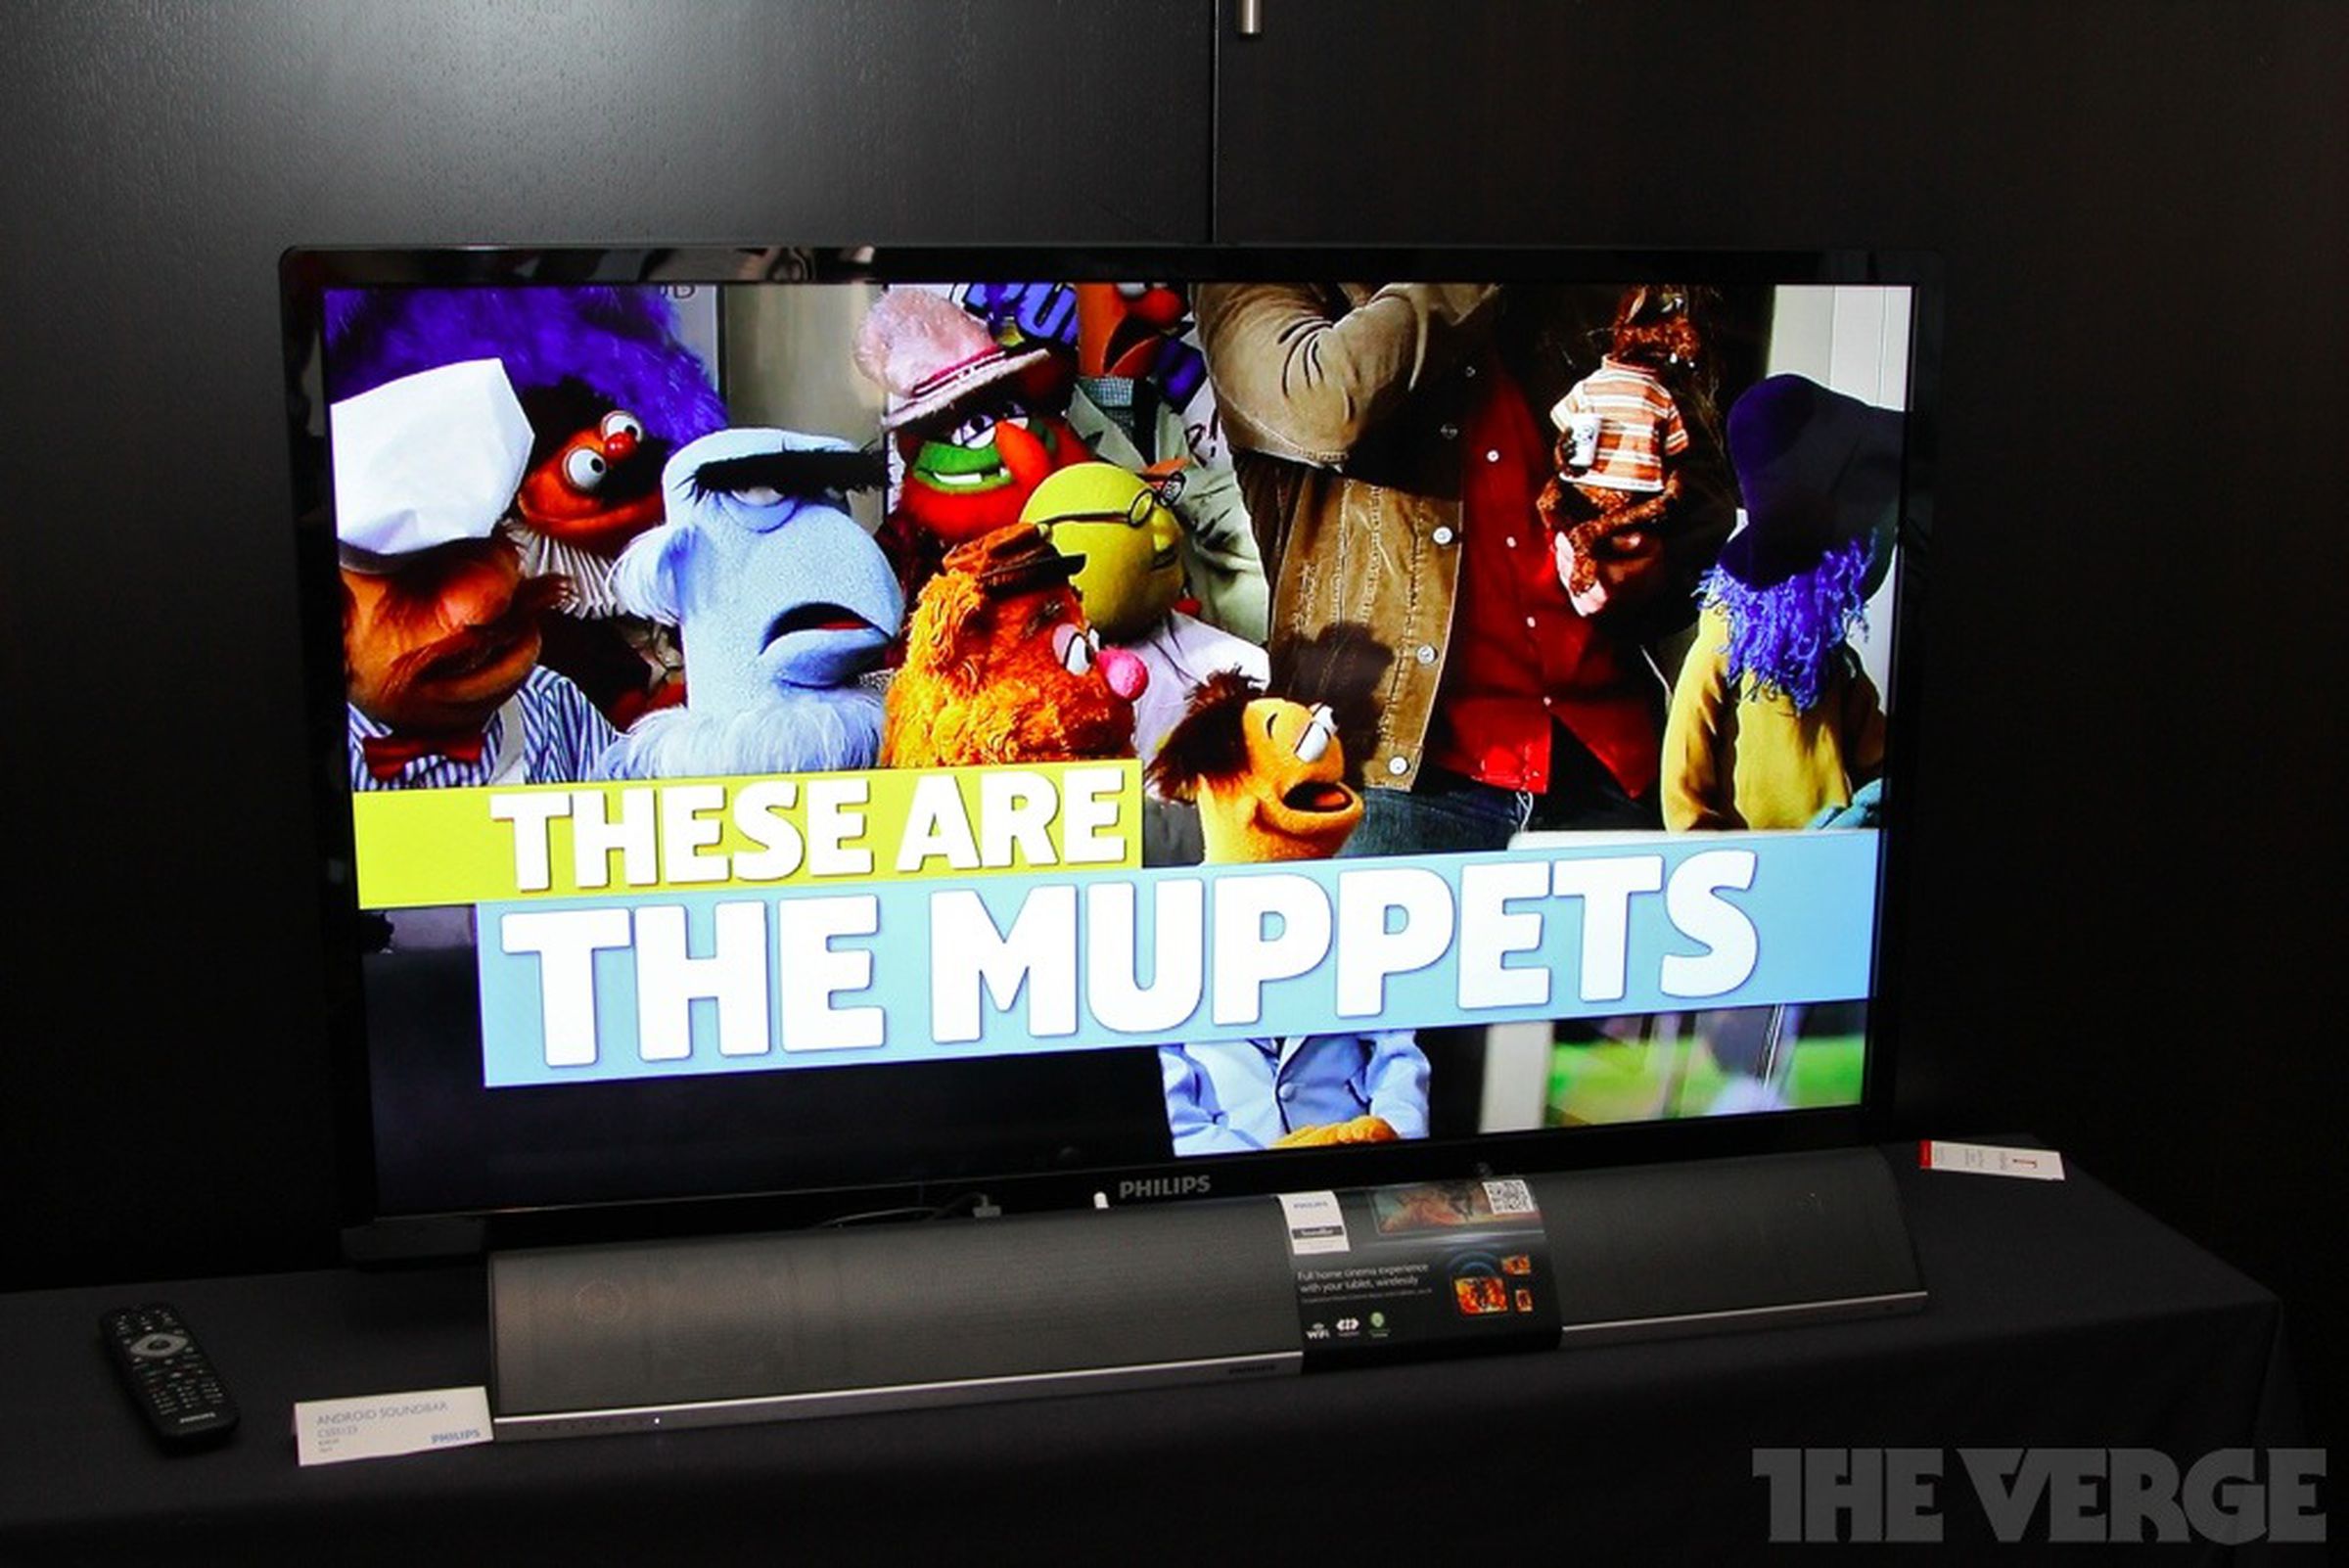 Philips SoundHub and Android Soundbar hands-on pictures